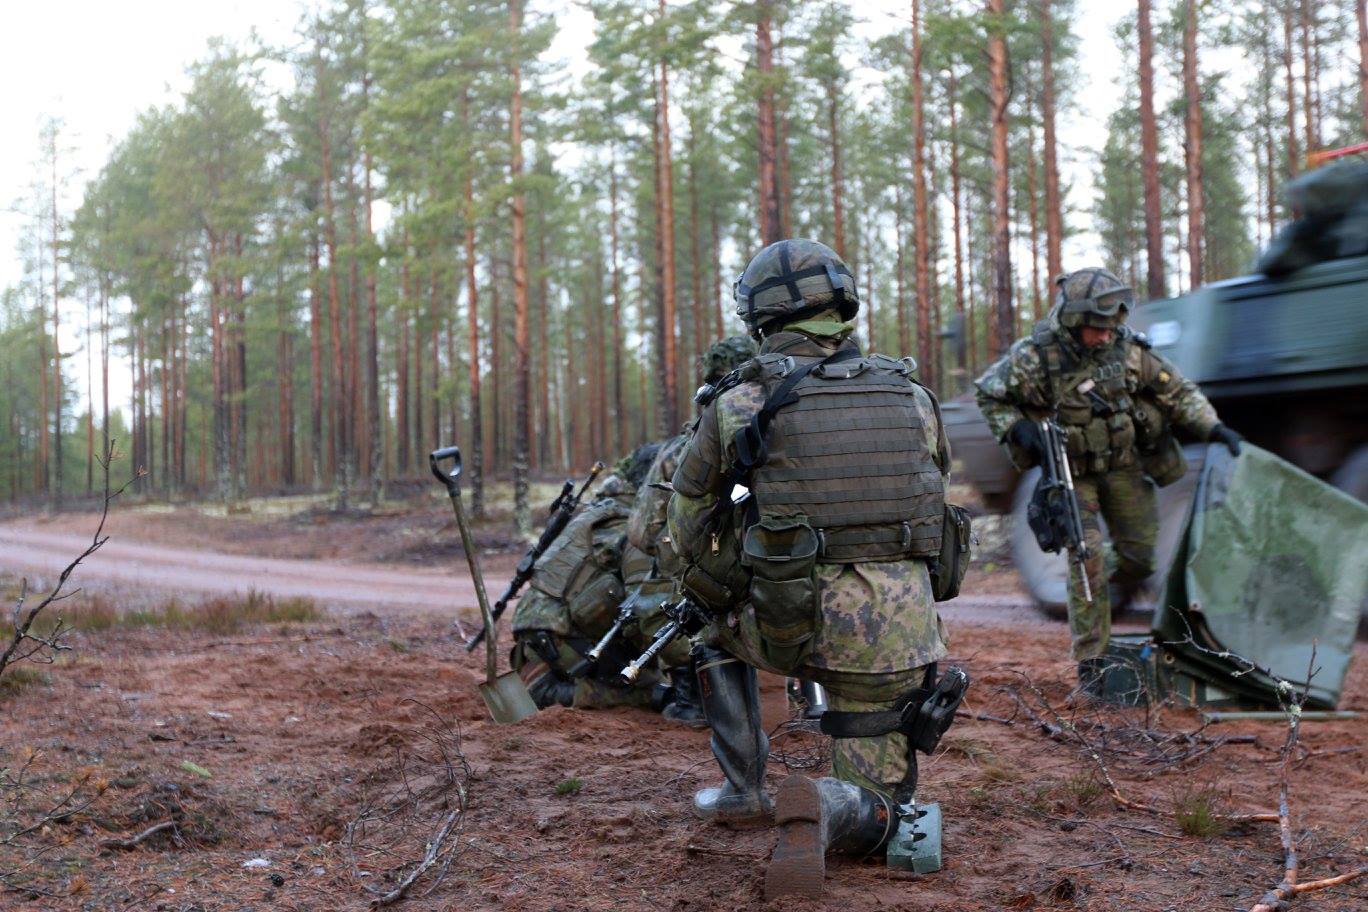 Soldiers in the woods during exercise.